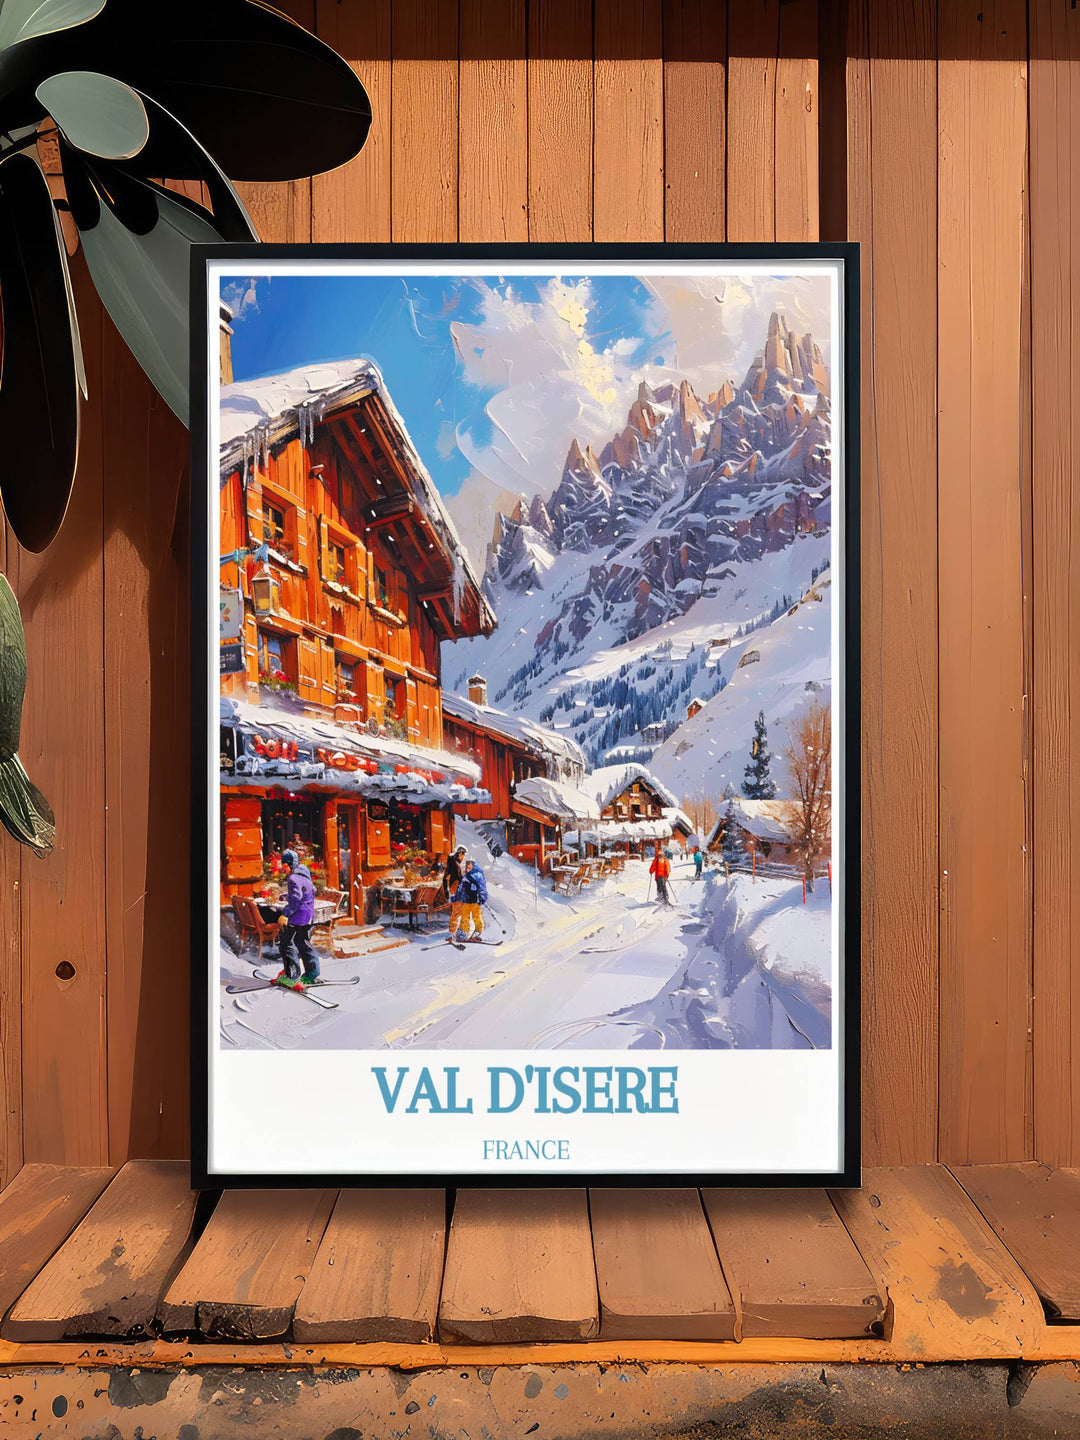 Val dIsère Solaise print with a vintage design, celebrating the history and tradition of skiing in the French Alps. Adds a touch of elegance and nostalgia to any space.